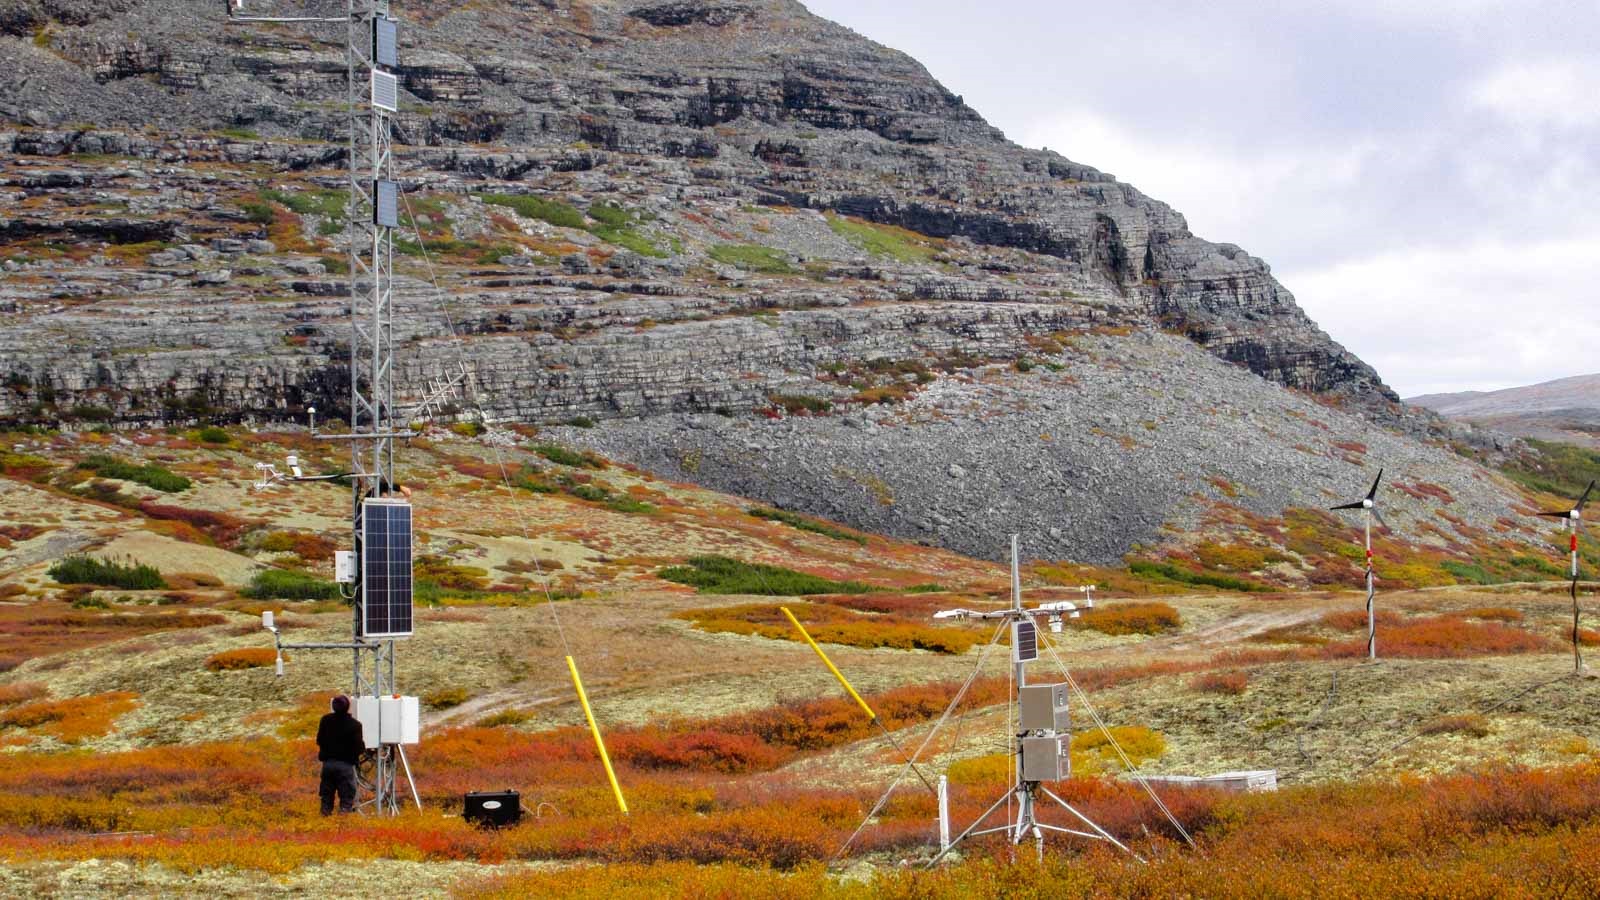 A new measurement station near Umiujaq in Canada, a transition zone from forest to tundra.